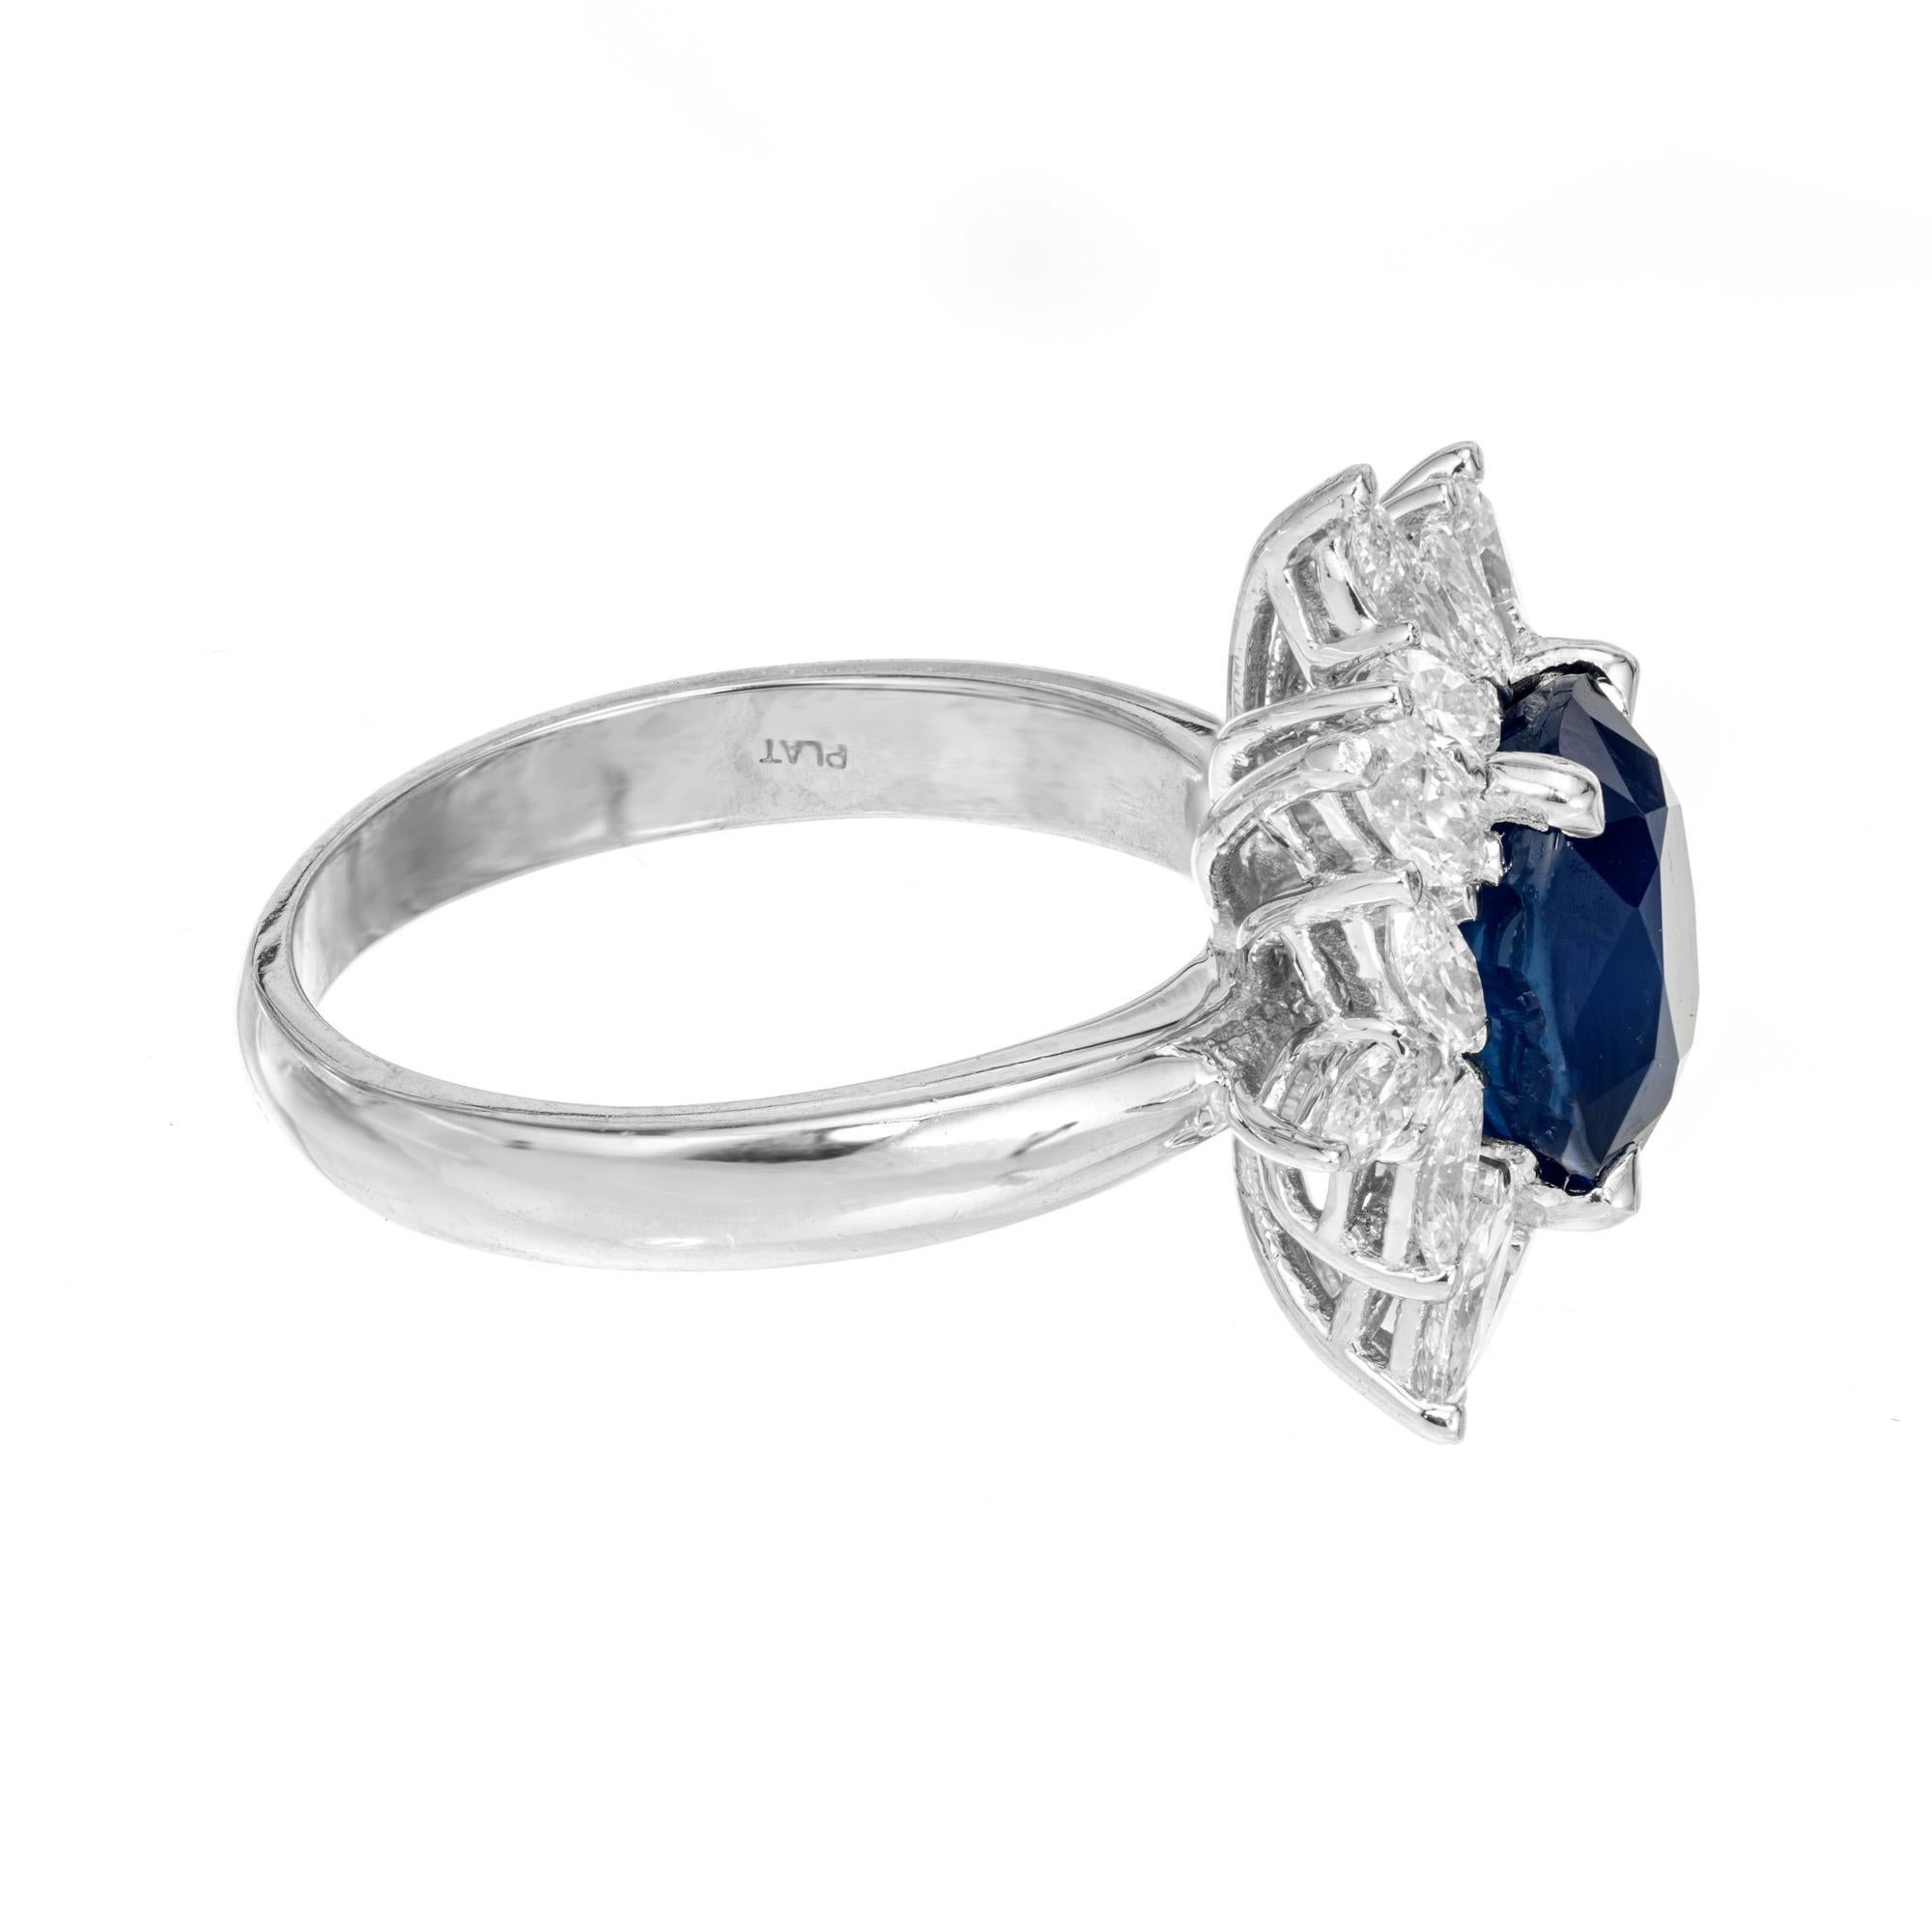 Marquise Cut GIA Certified 3.93 Carat Sapphire Diamond Halo Platinum Engagement Ring For Sale